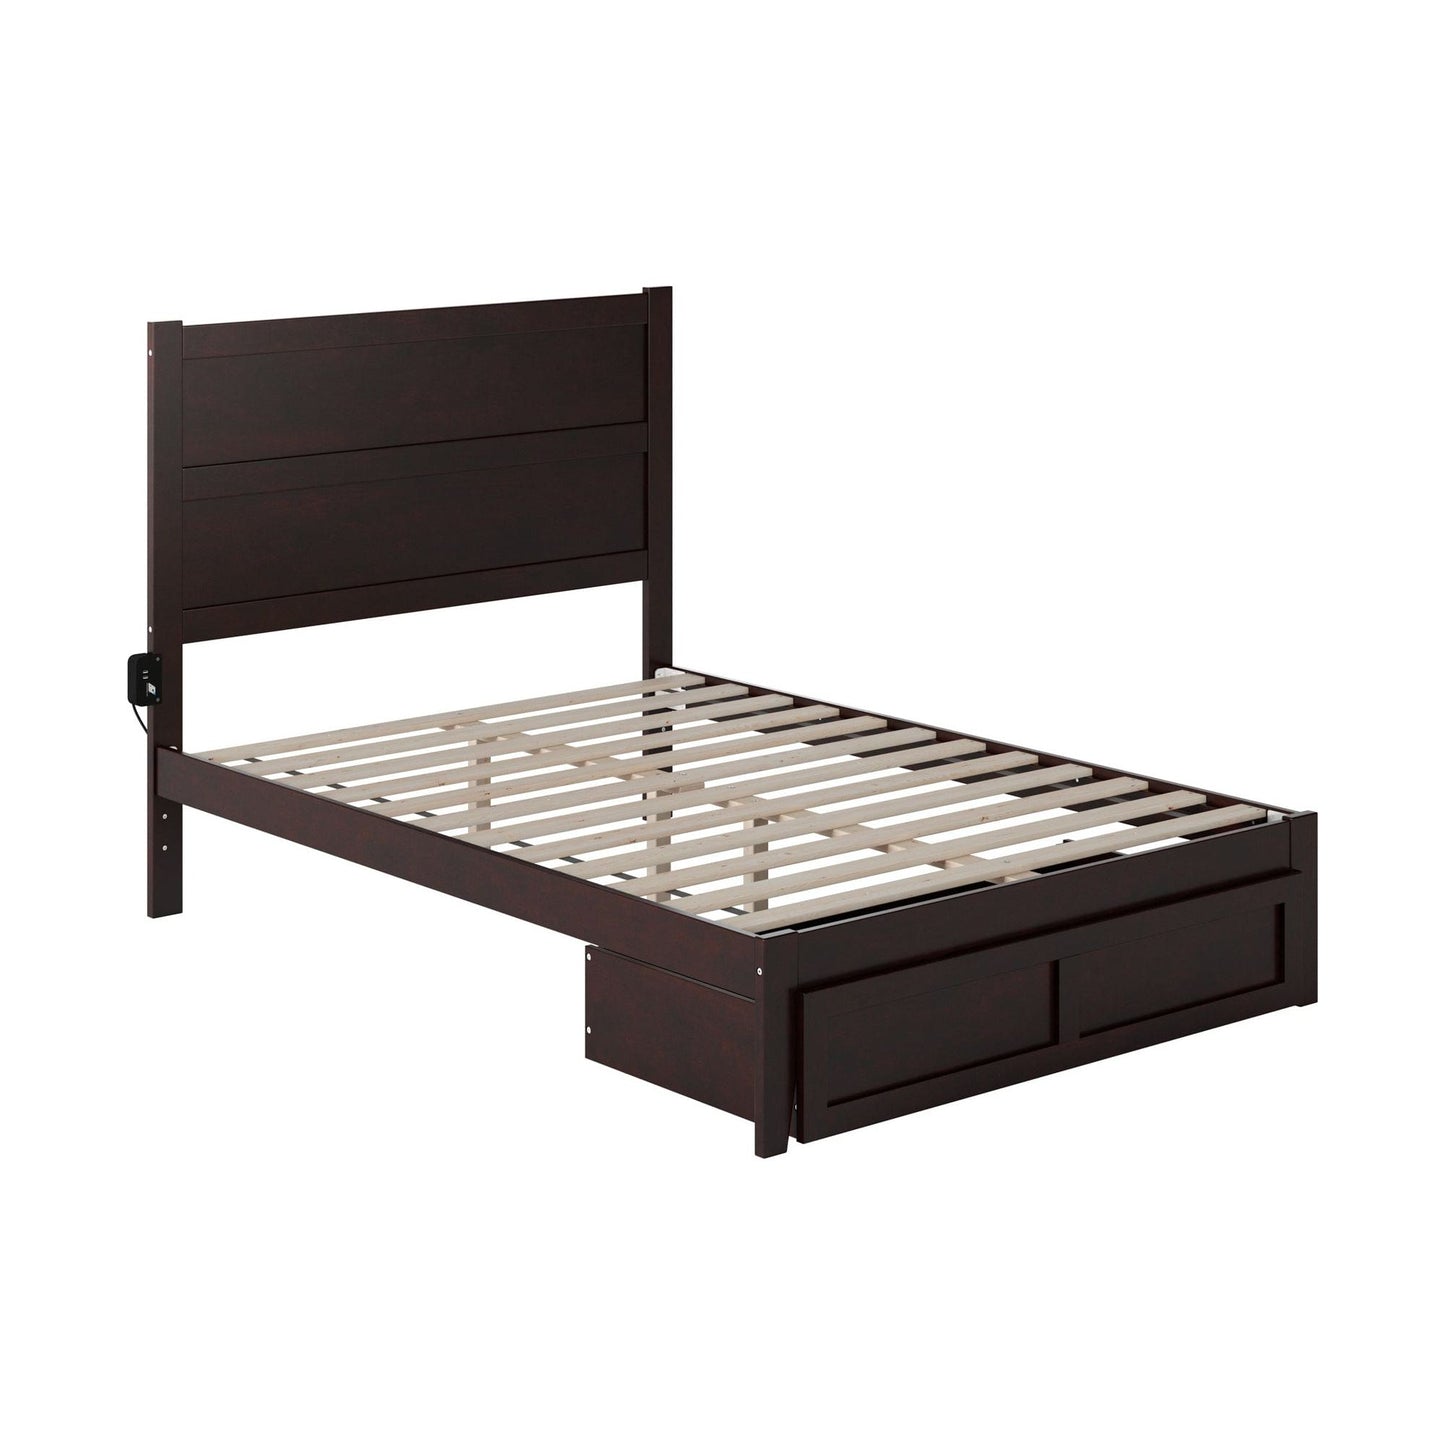 AFI Furnishings NoHo Full Bed with Foot Drawer in Espresso